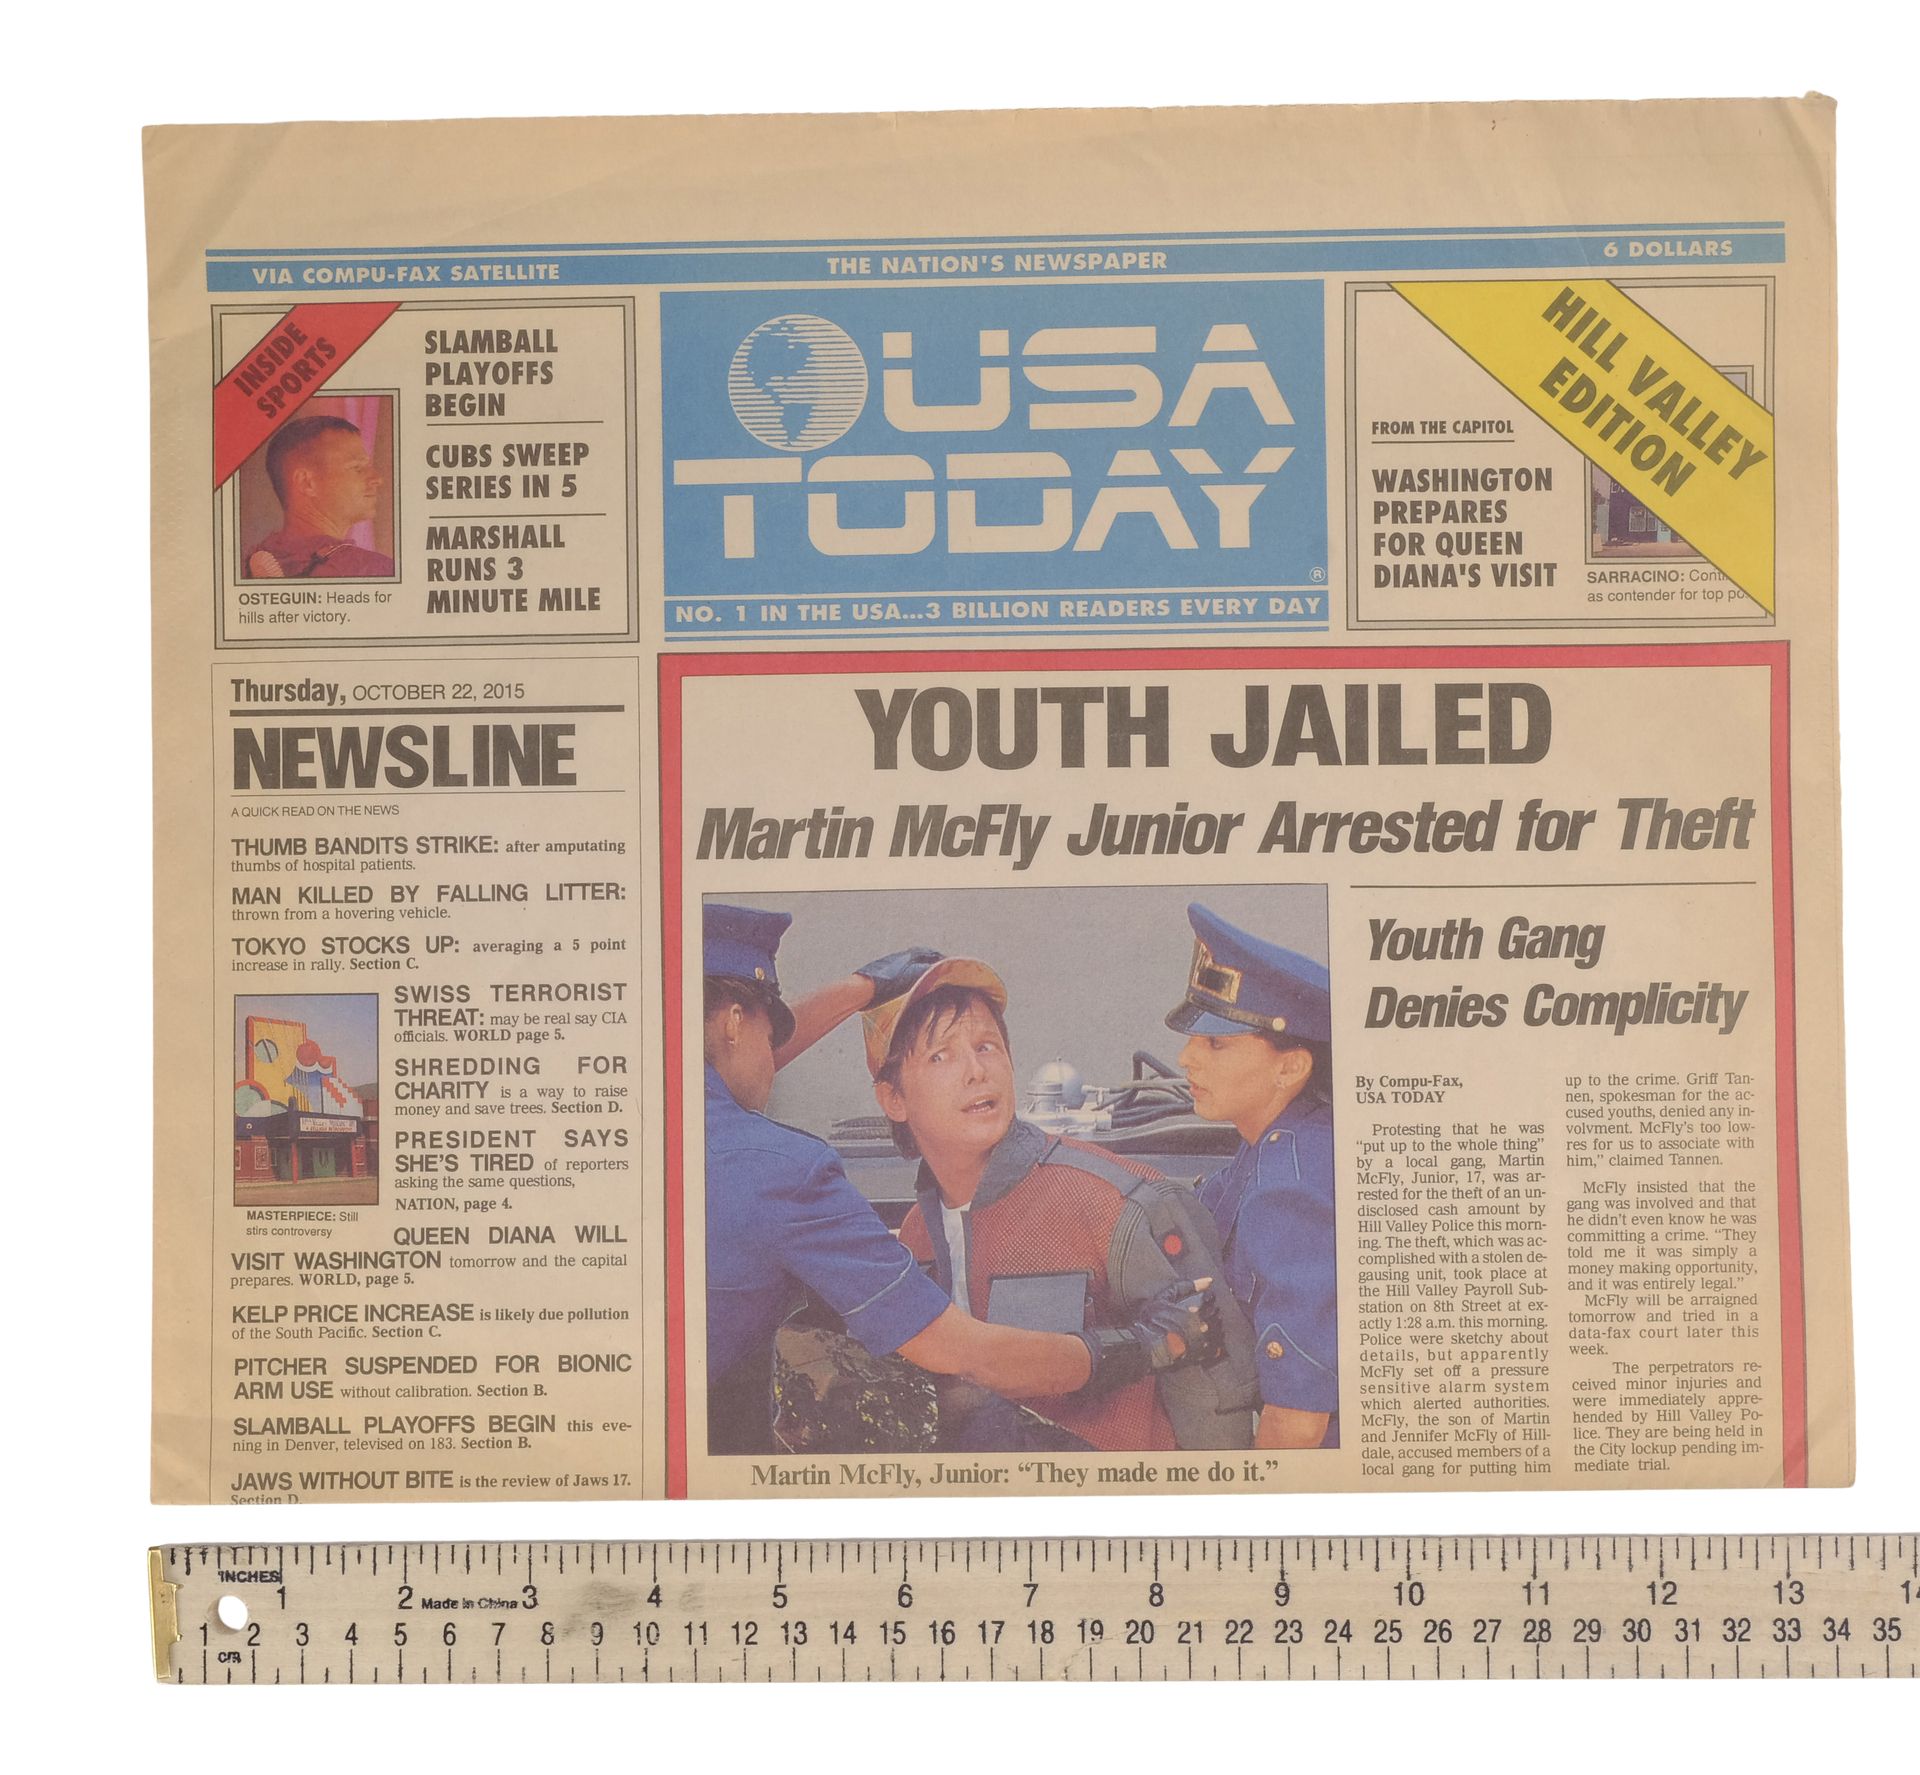 BACK TO THE FUTURE PART II (1989) - "Youth Jailed" USA Today Newspaper Cover - Image 4 of 4